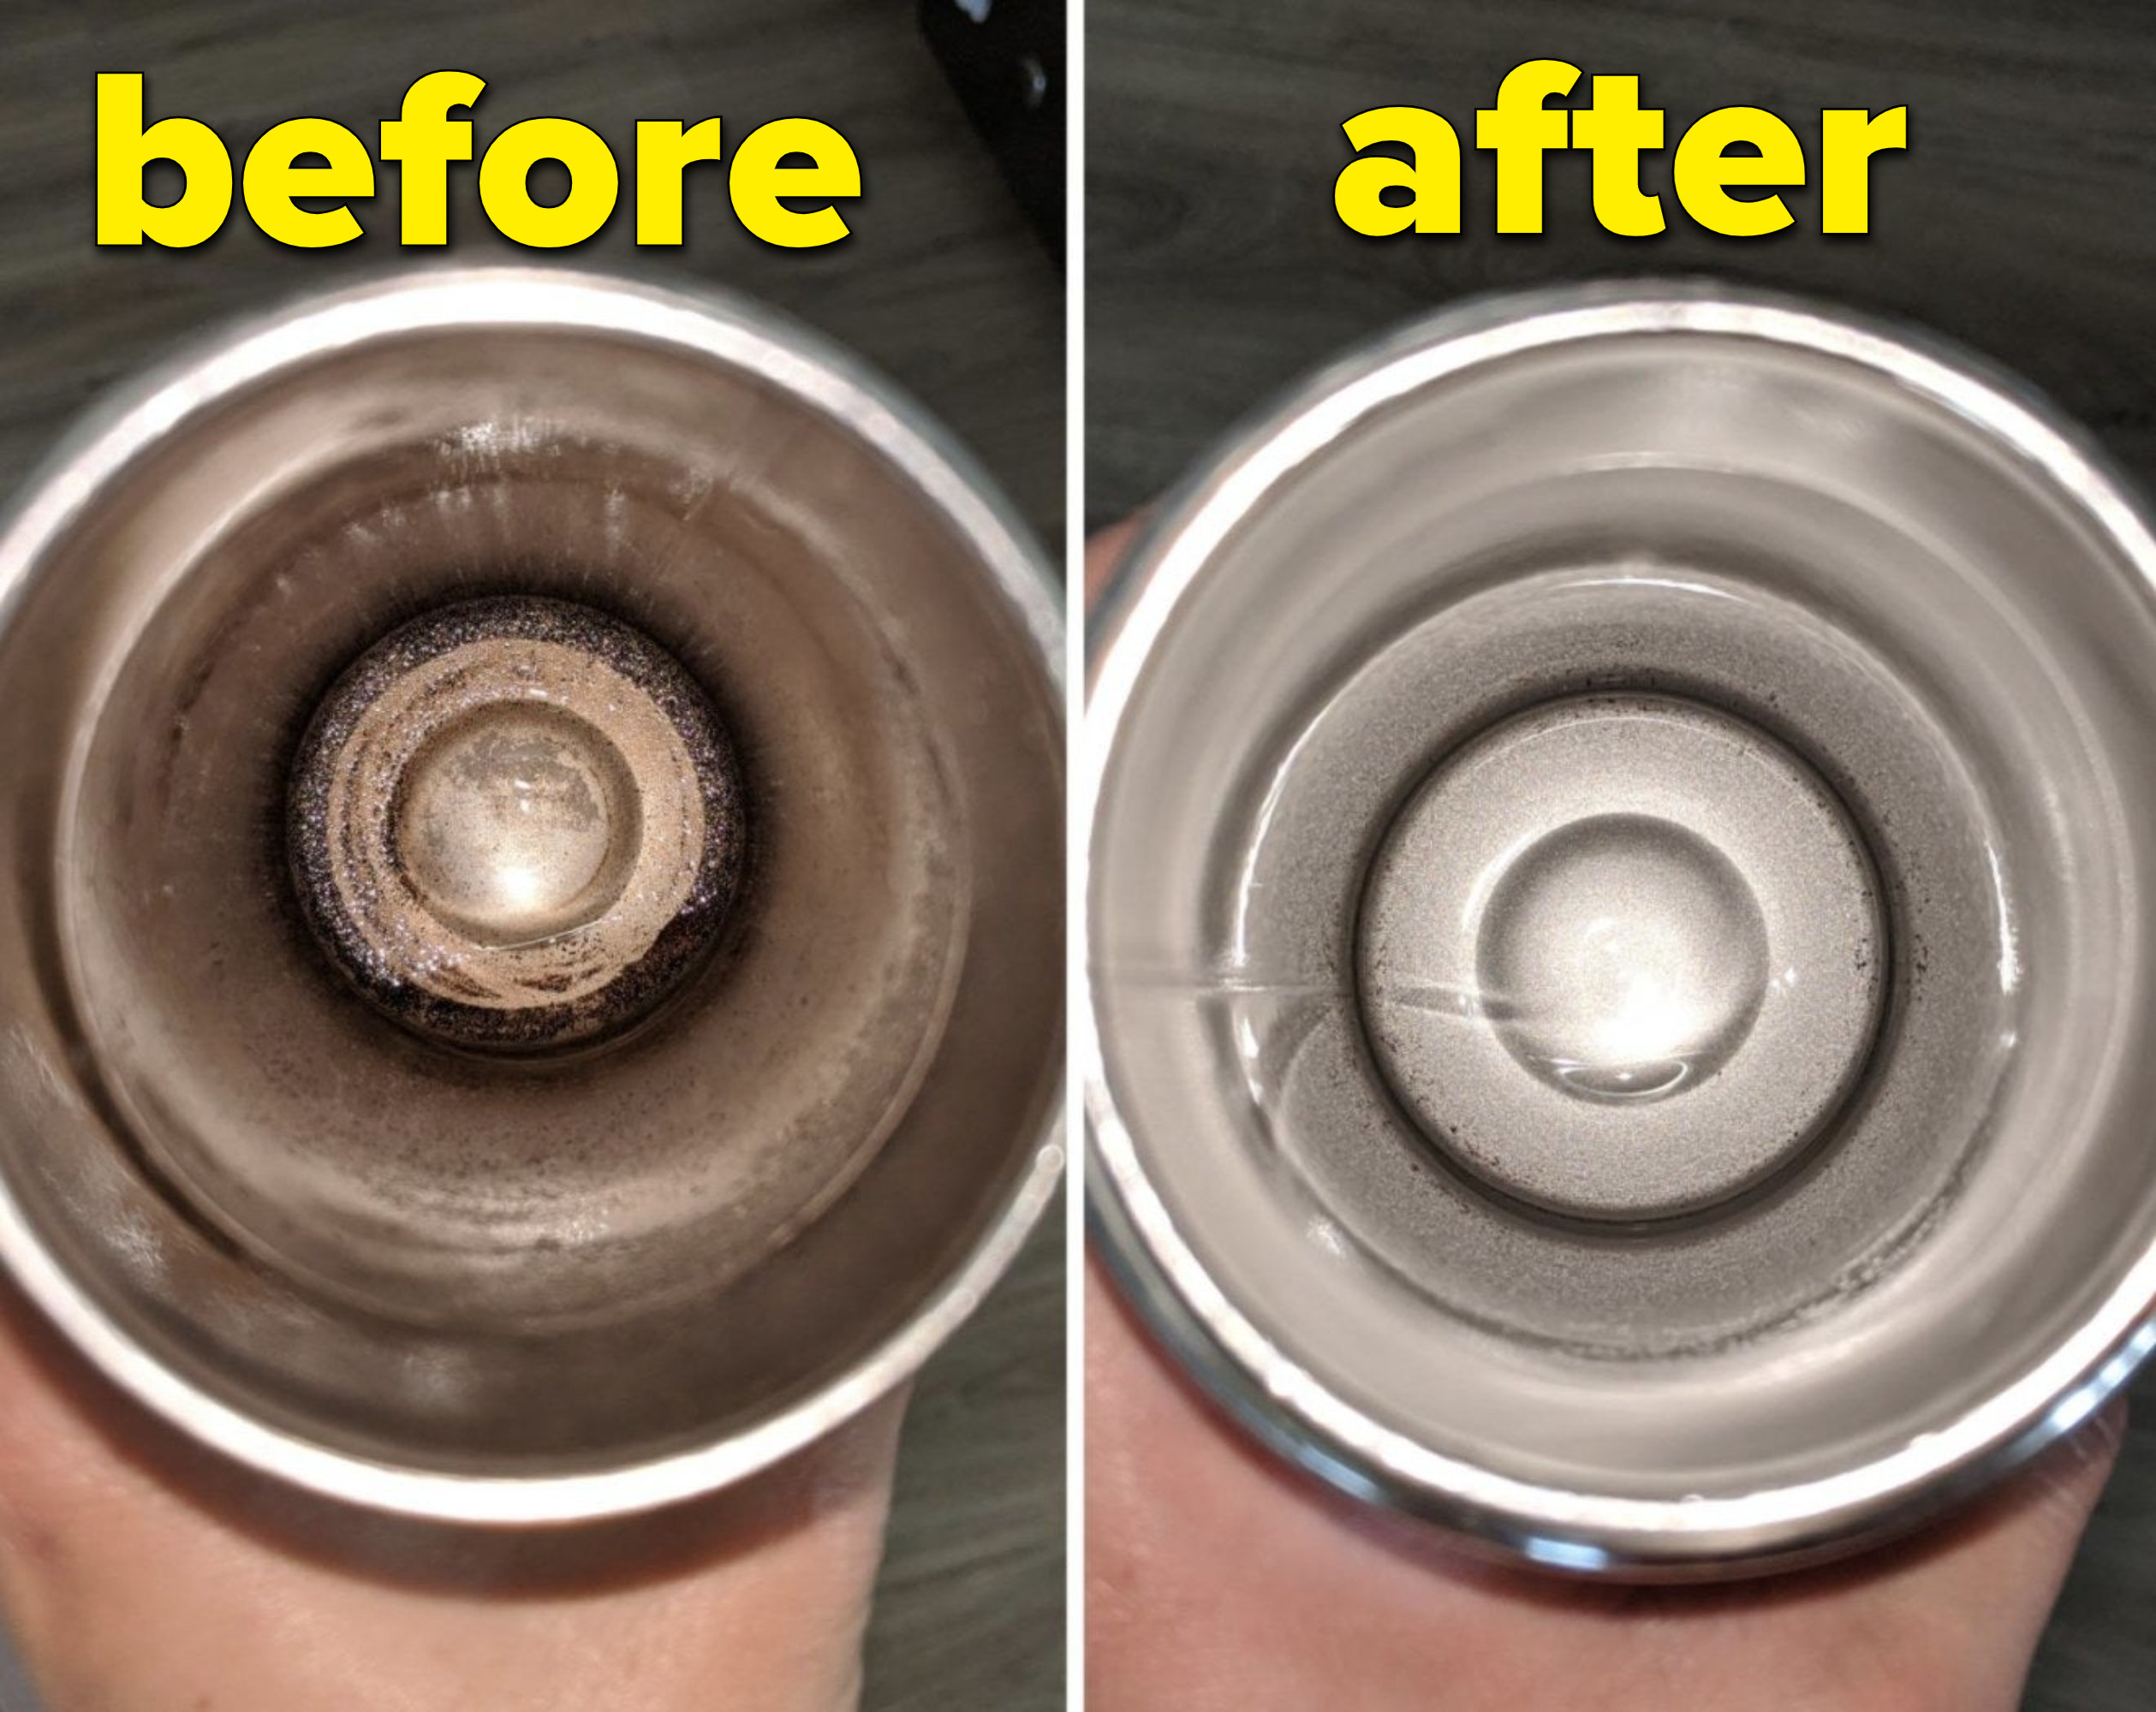 A before and after of the inside of a Hydroflask